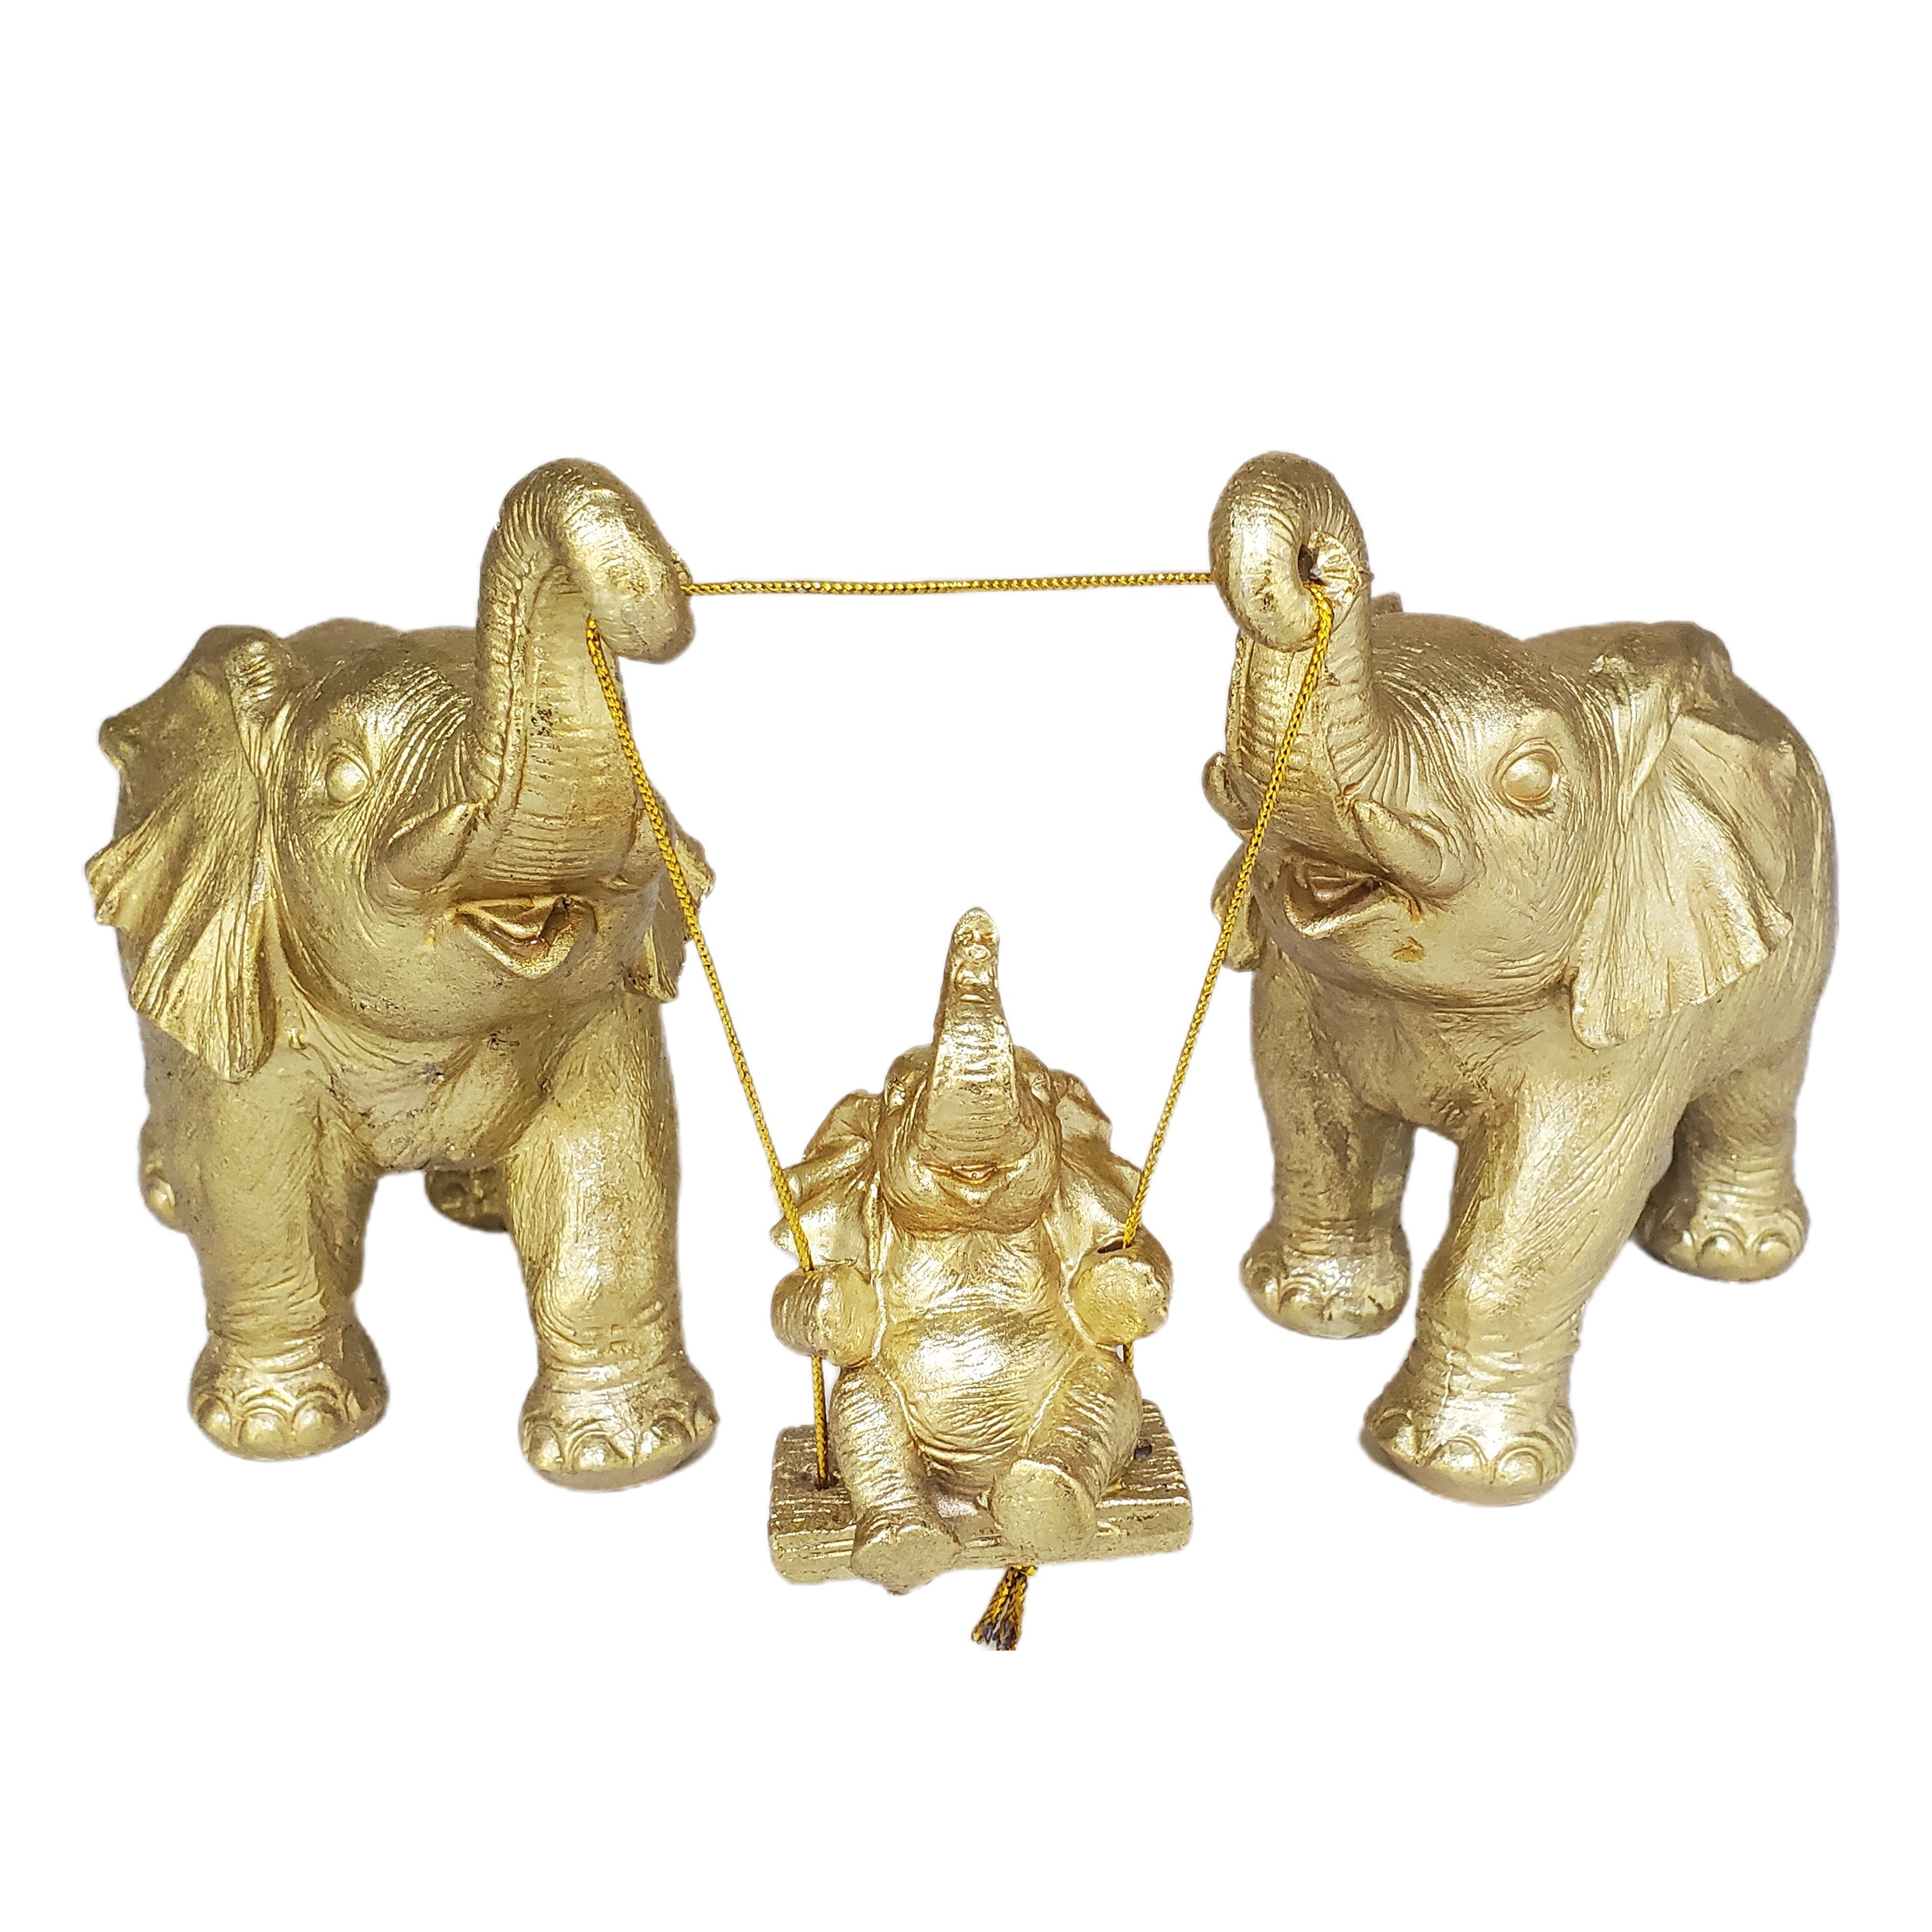 Elephant Statue. Elephant Decor Brings Good Luck, Health, Strength.  Elephant Gifts for Women, Mom Gifts. Decorations Applicable Home, Office,  Bookshelf TV Stand, Shelf, Living Room - Silver 